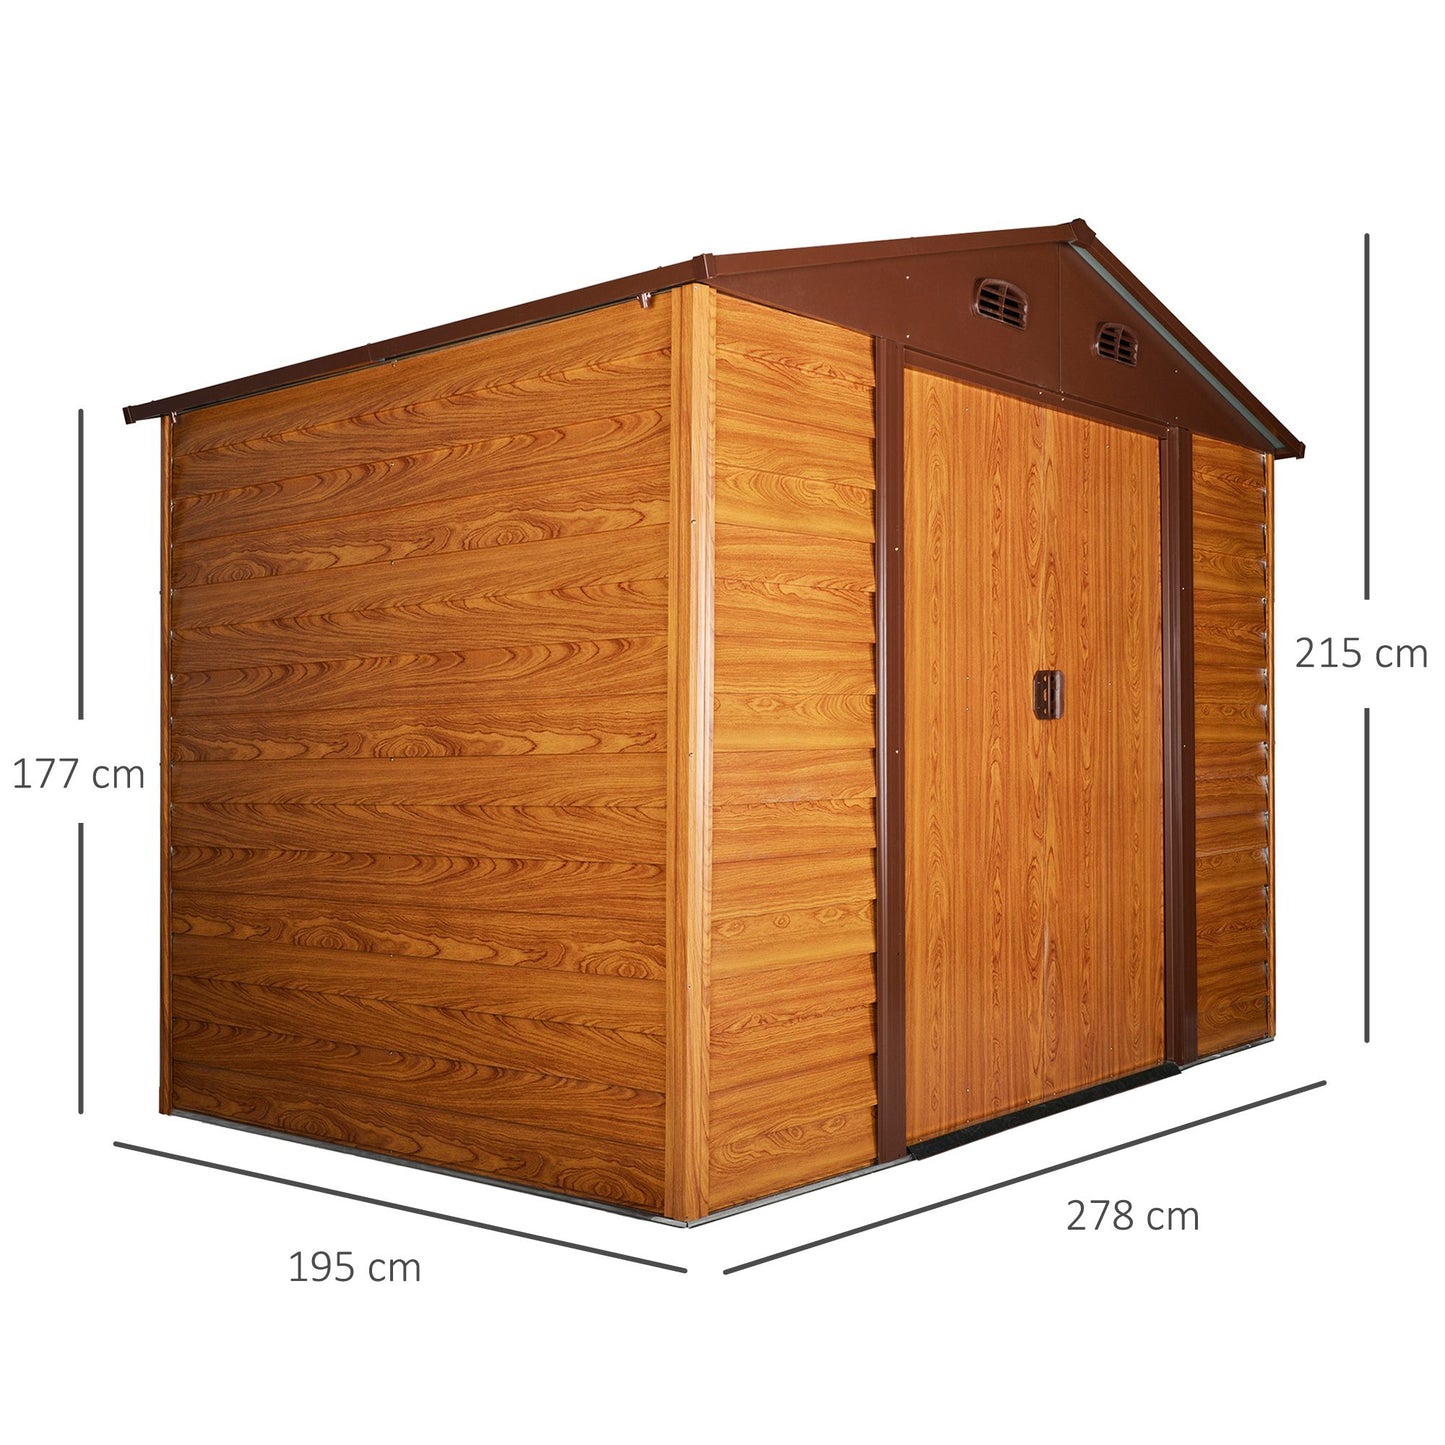 Outsunny 6.3 x 9.1ft Slatted Steel Wood Effect Garden Shed - Brown